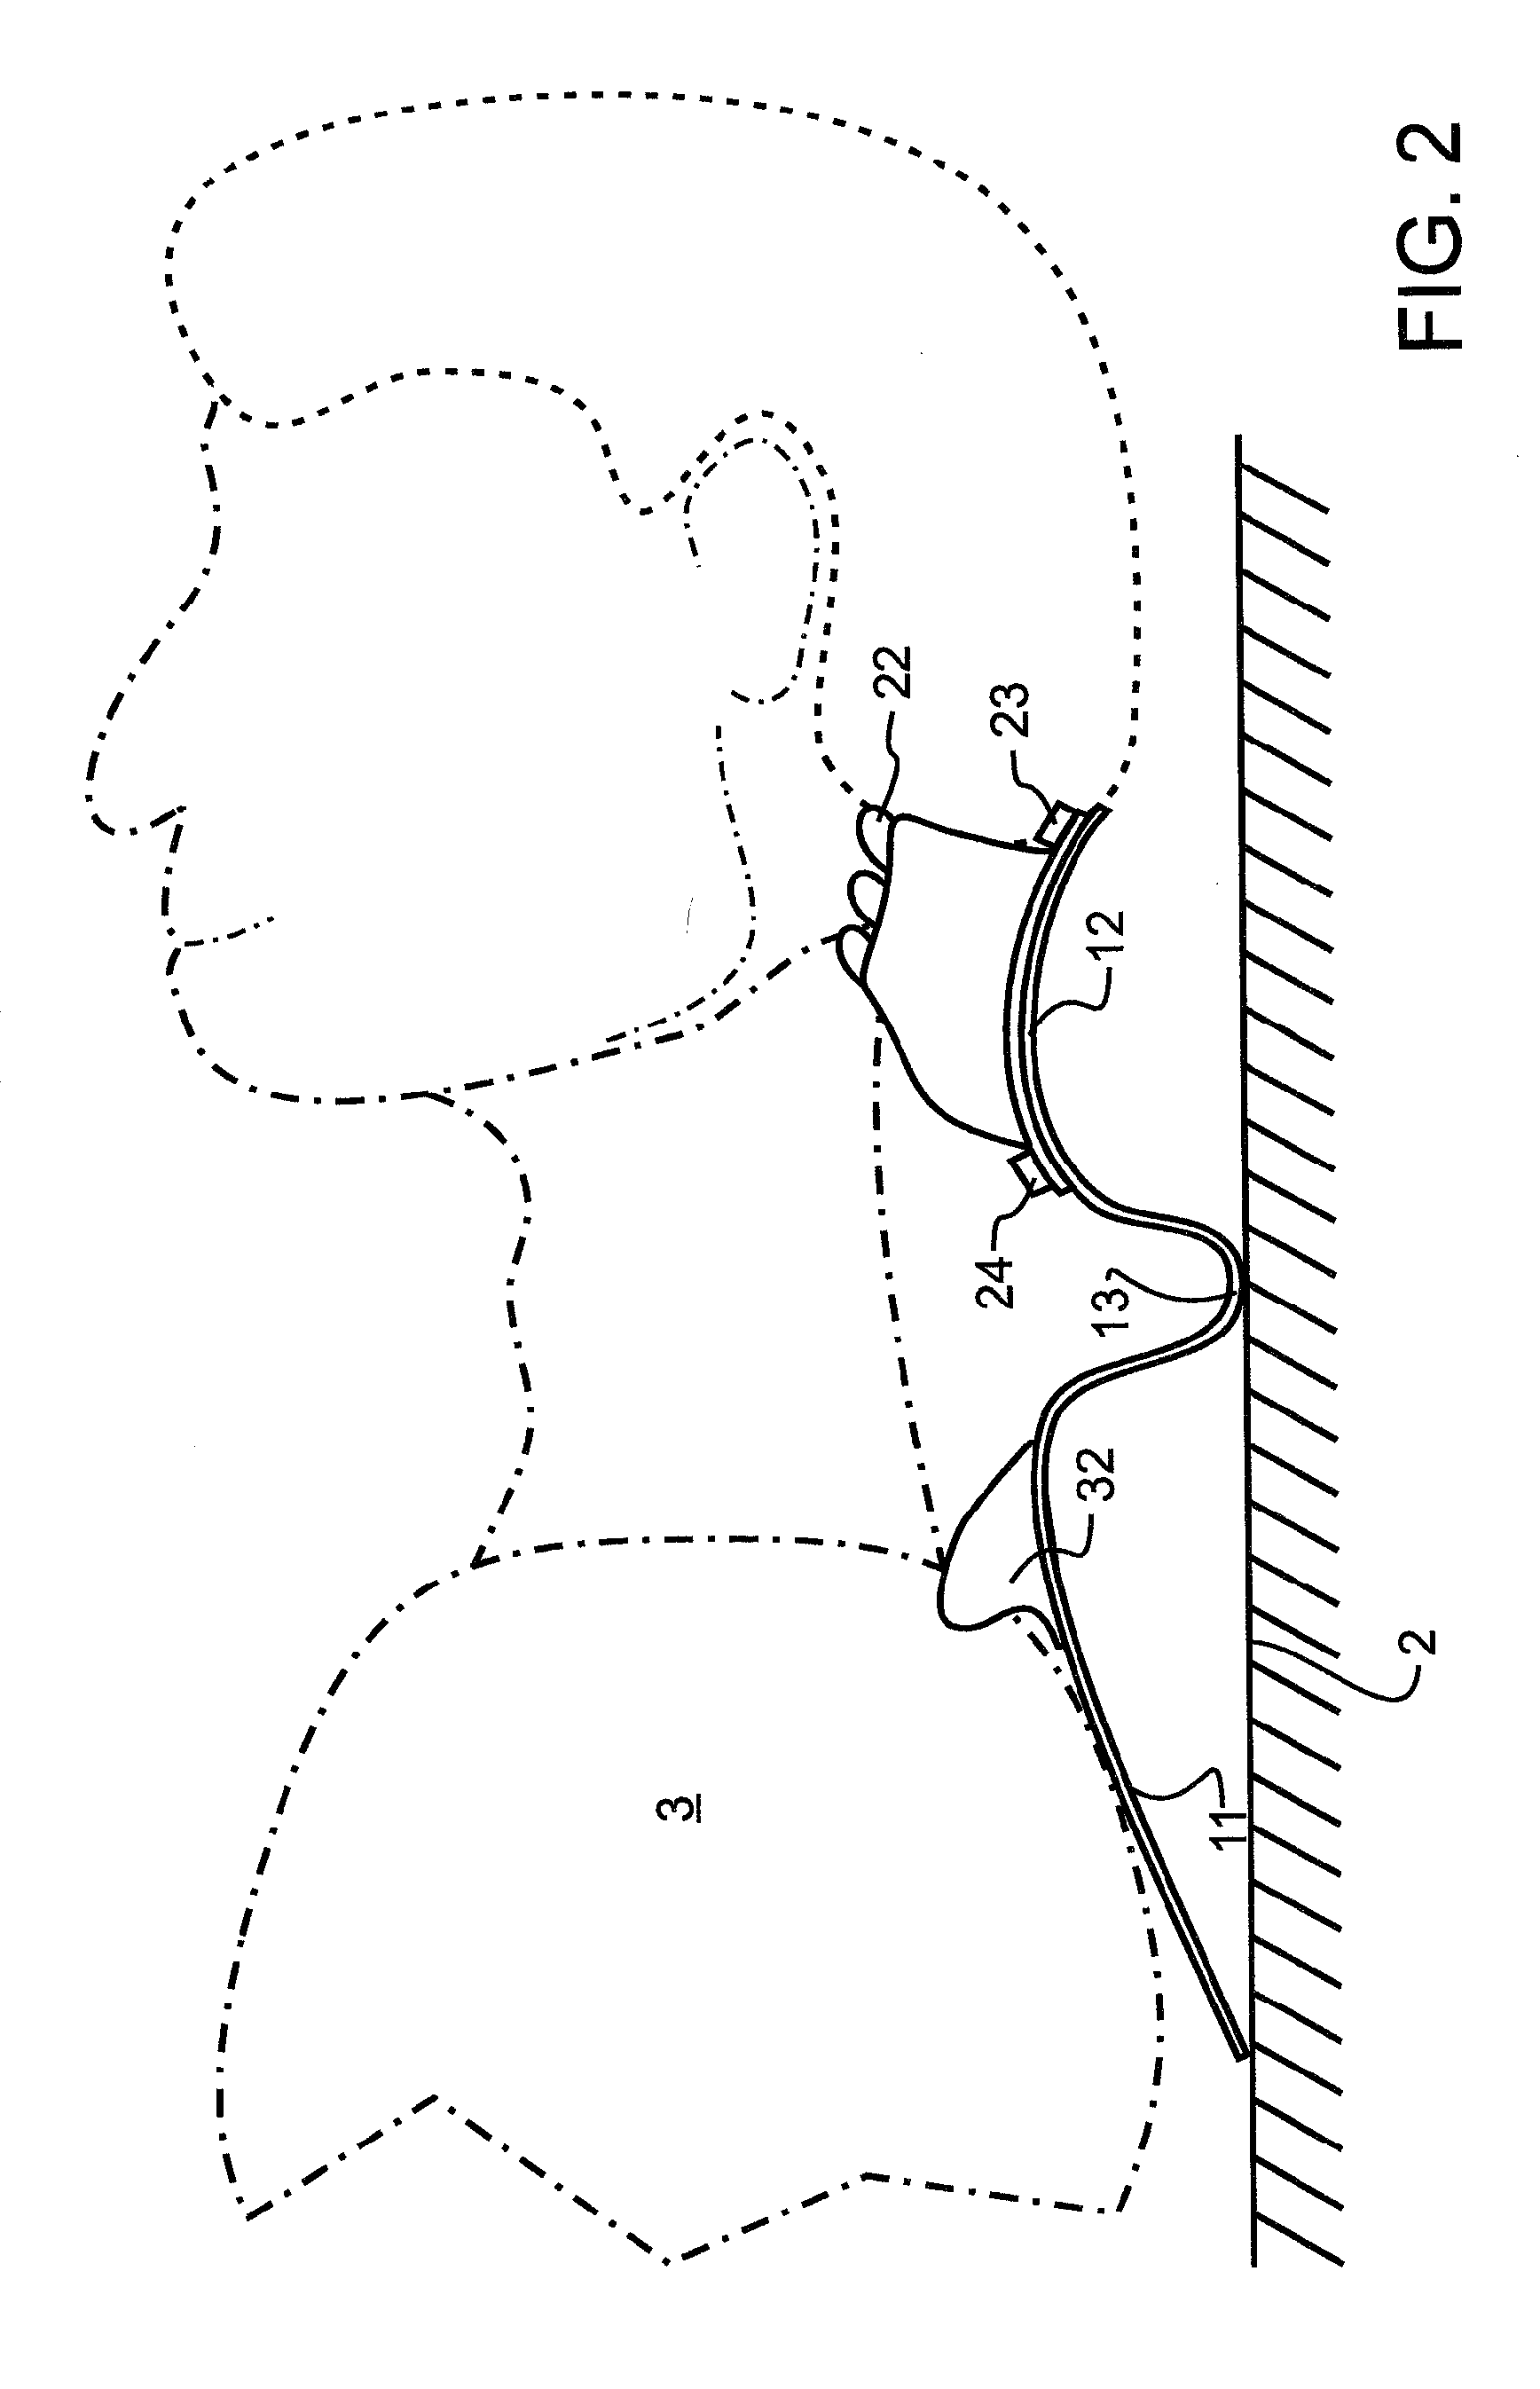 Mechanical massage and traction apparatus